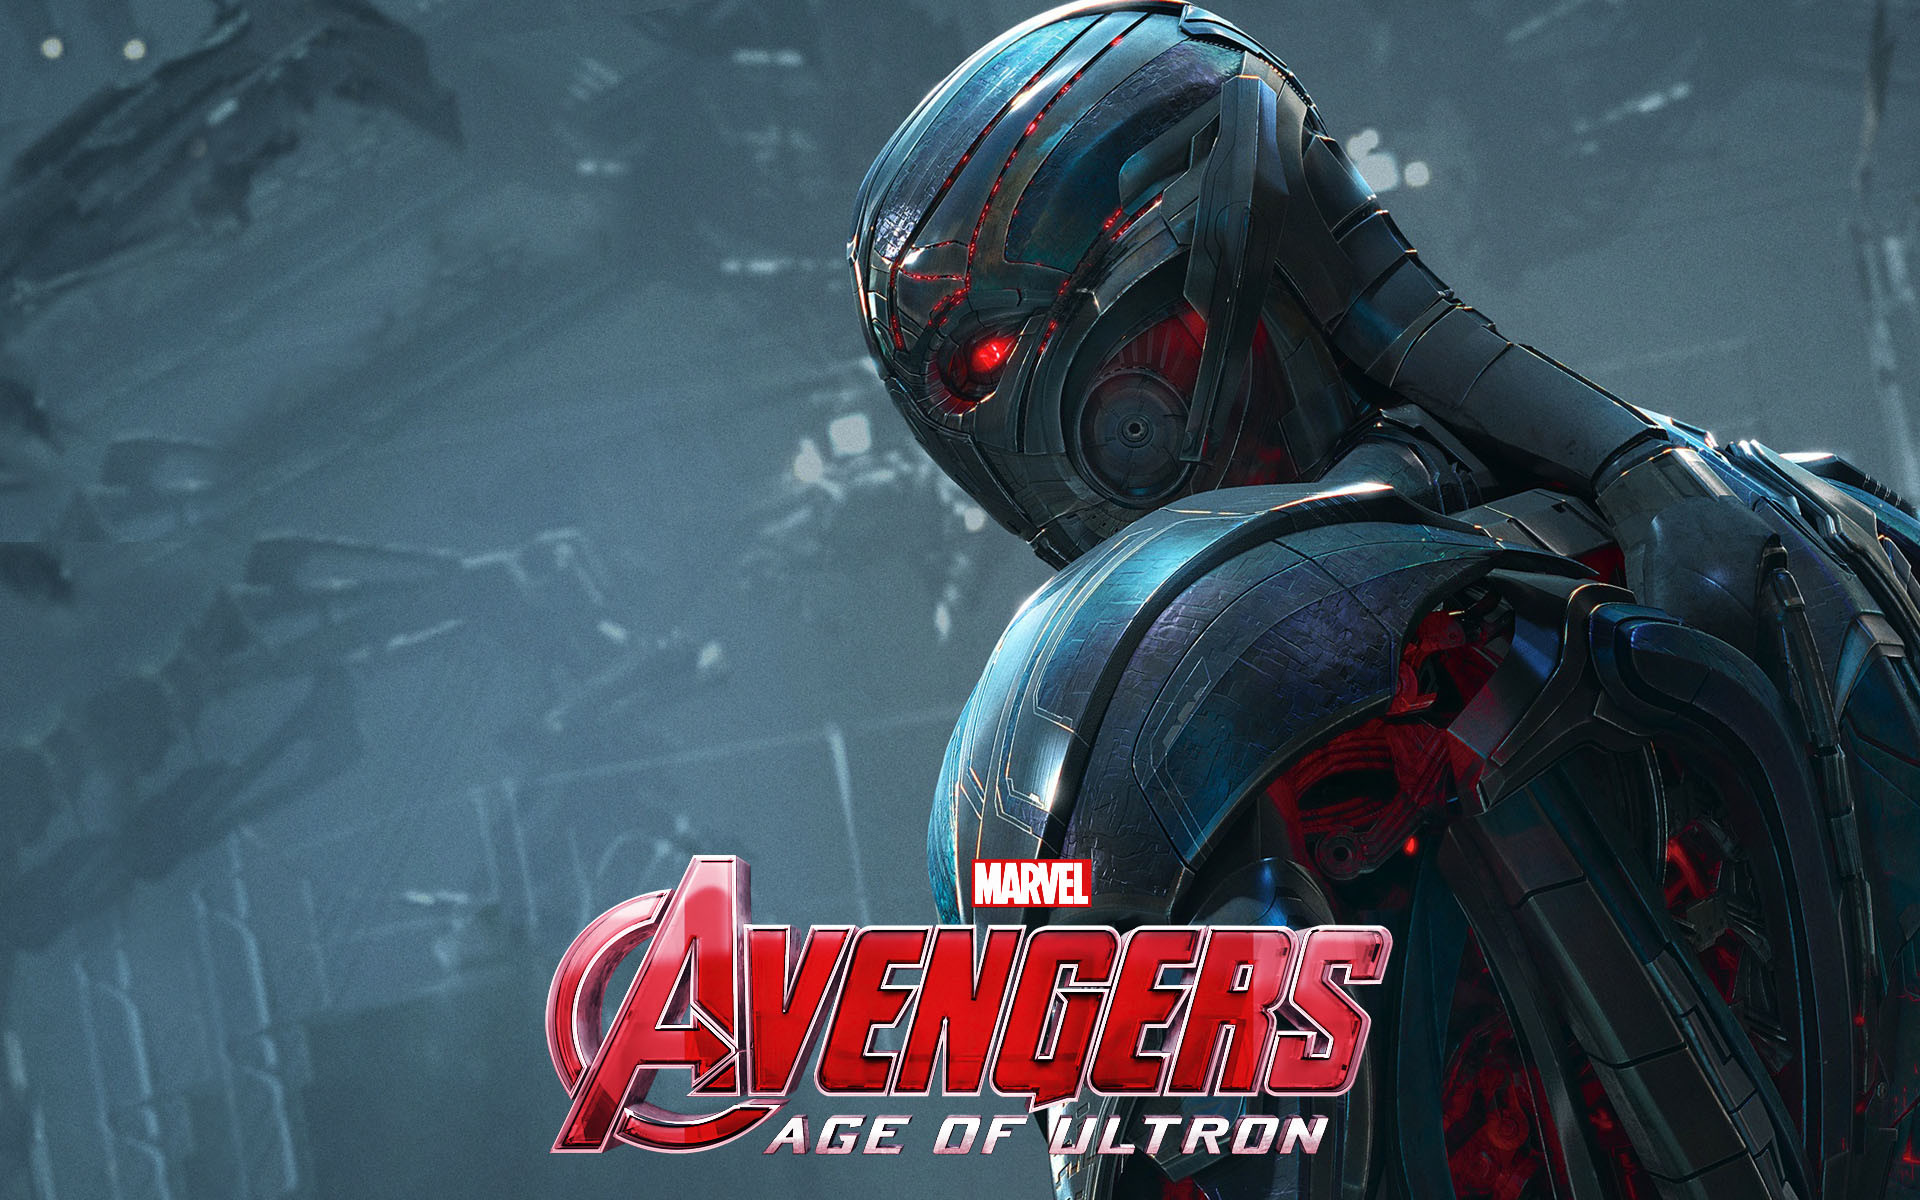 Download Wallpaper 1920×1080 Avengers age of ultron, Marvel … | Download  Wallpaper | Pinterest | Avengers wallpaper, Wallpaper and Wallpaper  downloads